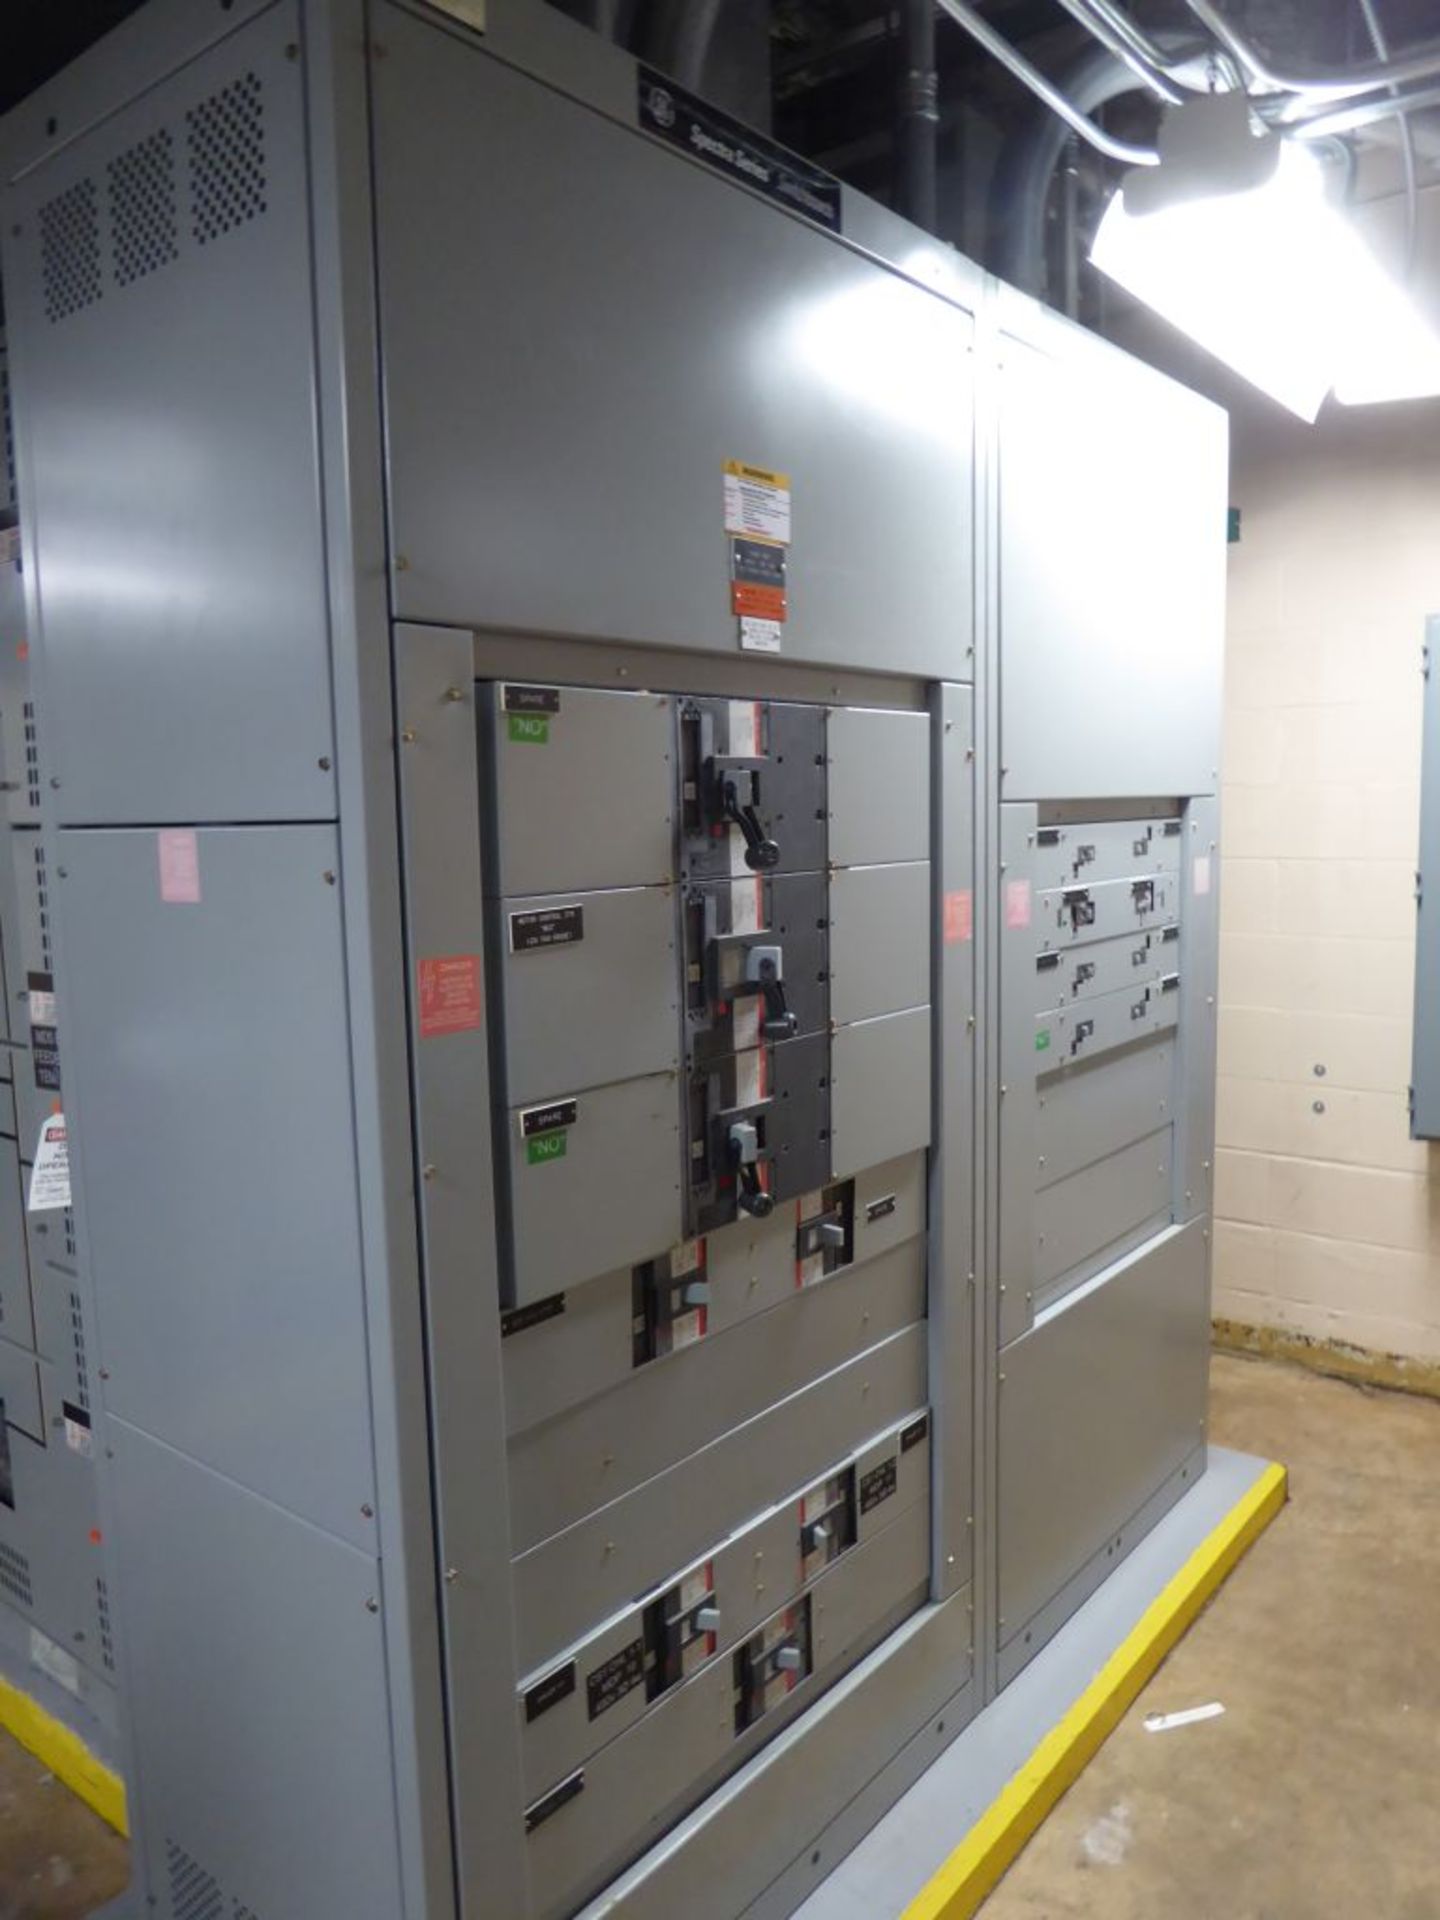 Charlotte, NC - GE 1600A Spectra Series Switchboard